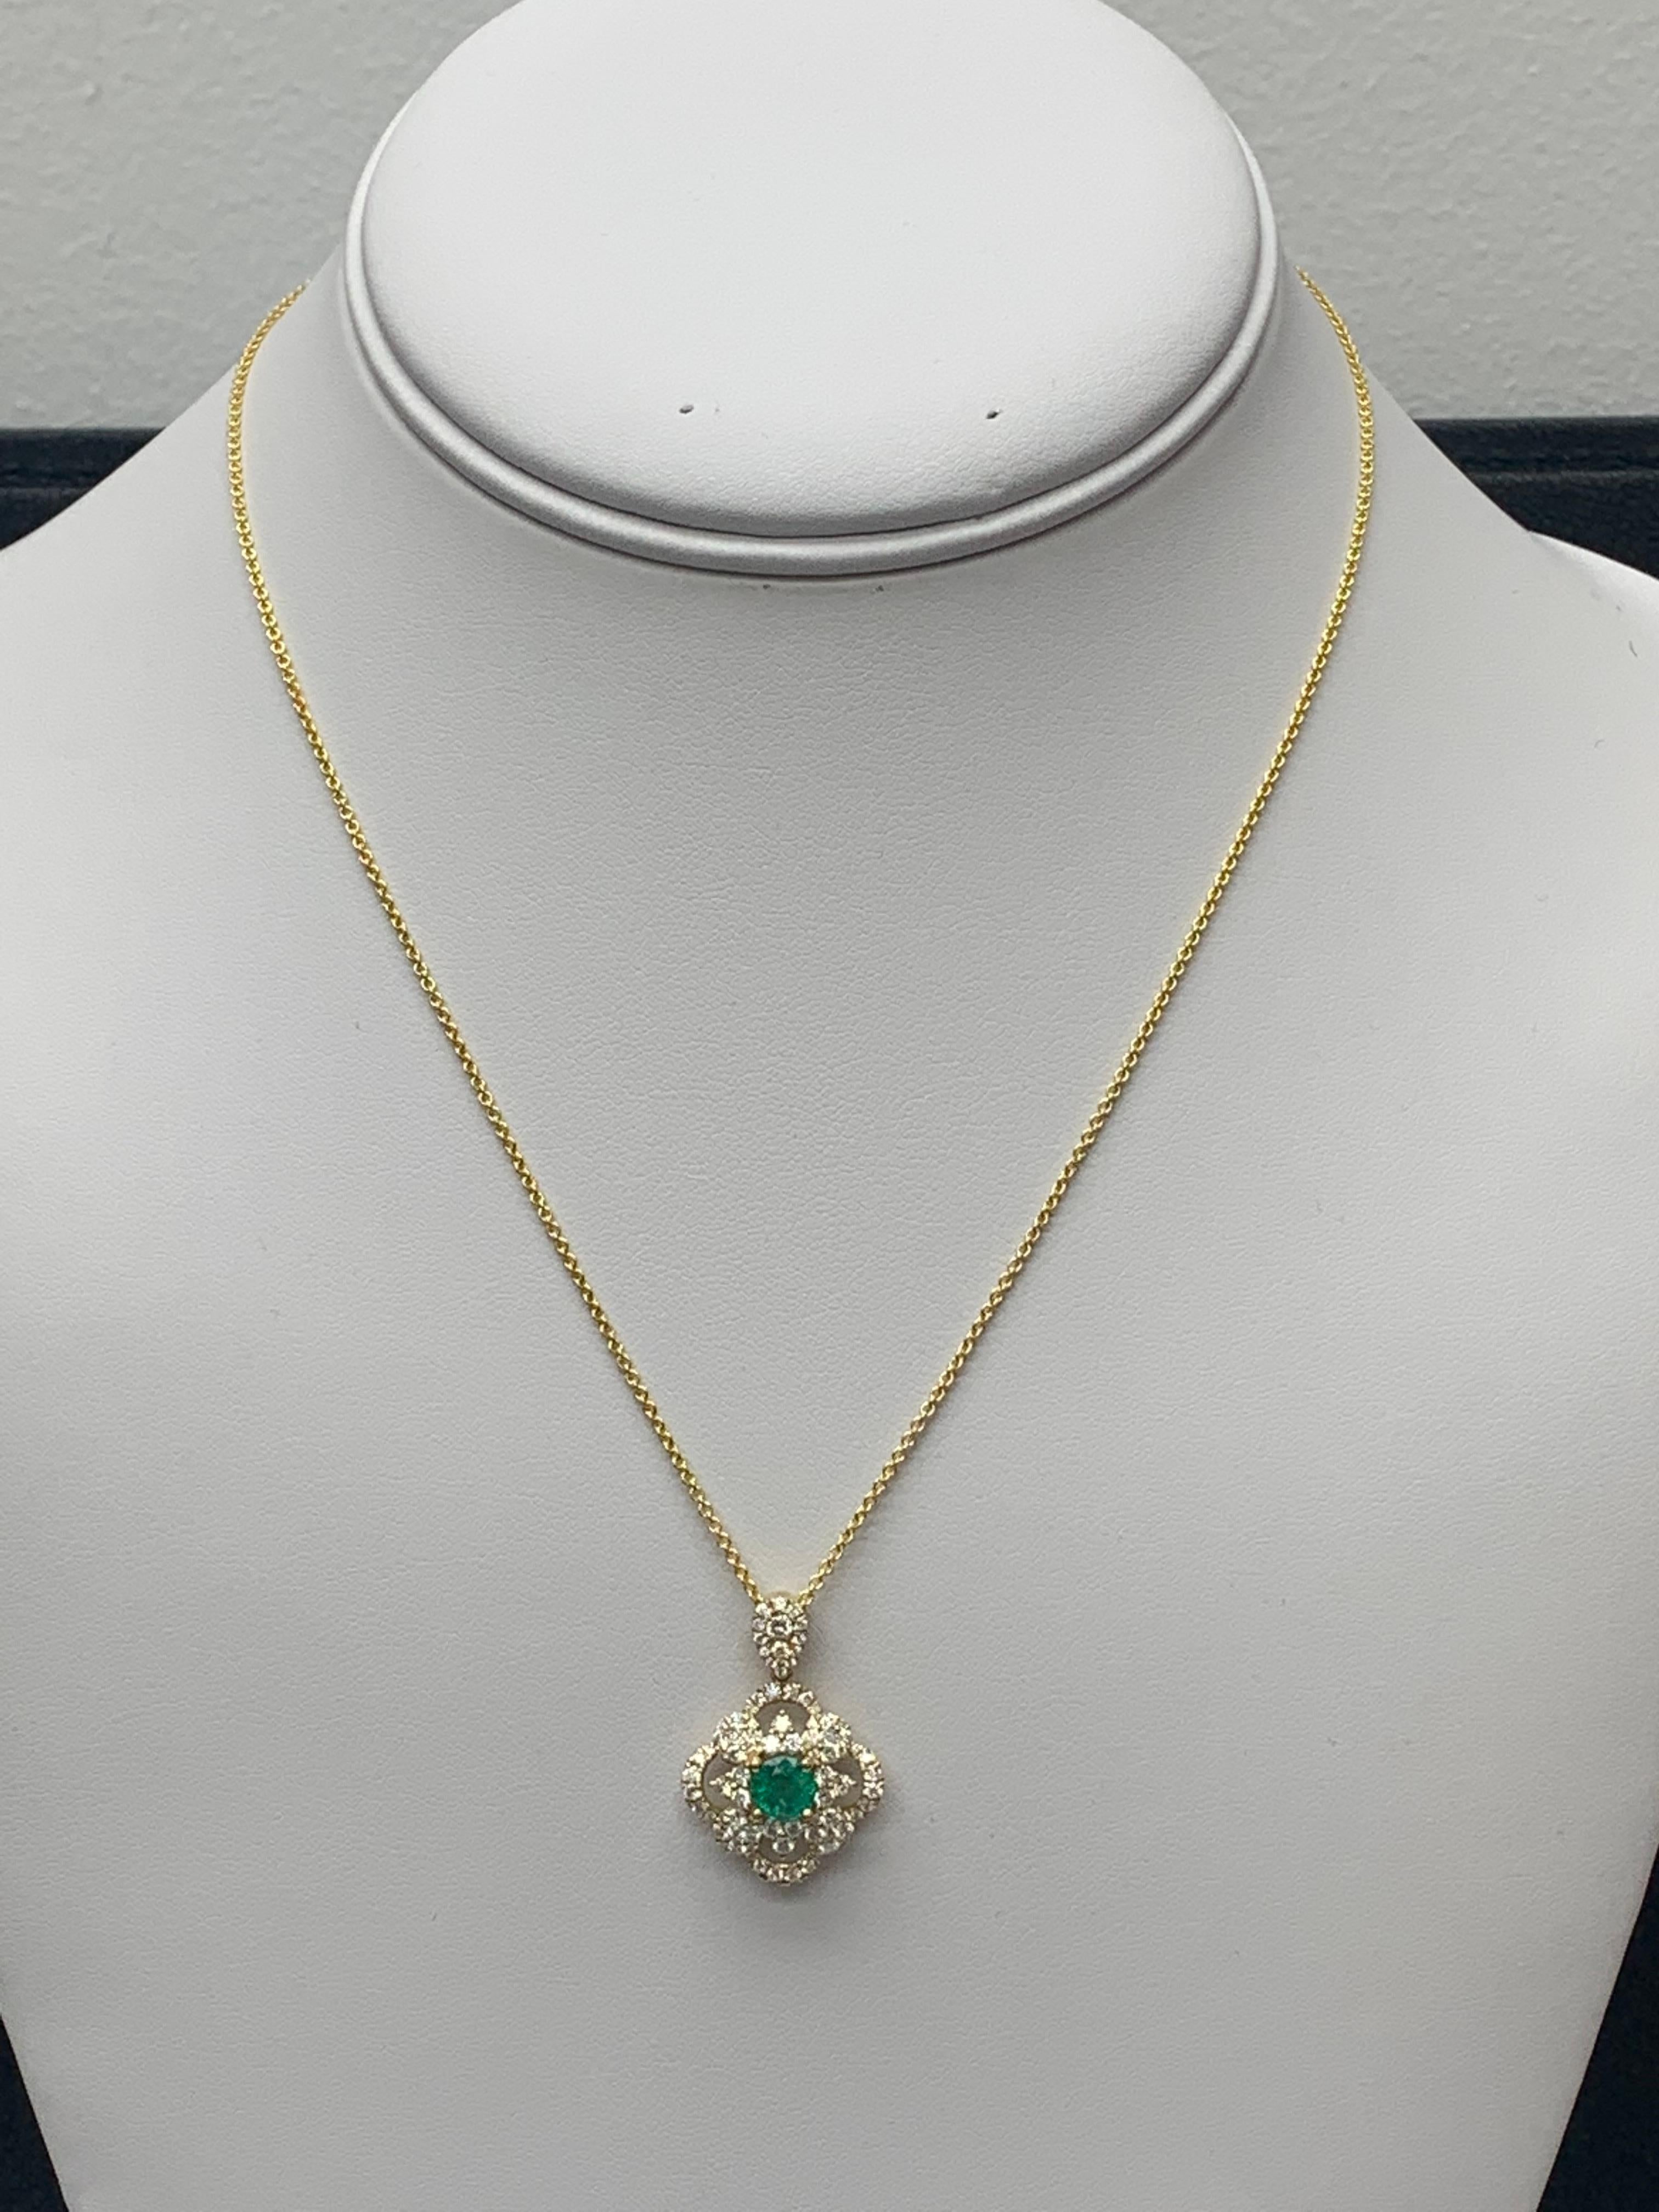 A Classic pendant necklace Set with a round green emerald center stone accented by 76 accent brilliant diamonds  in an open work design. The weight of diamonds and emerald is 1.03 carats and 0.67 carats respectively. 16